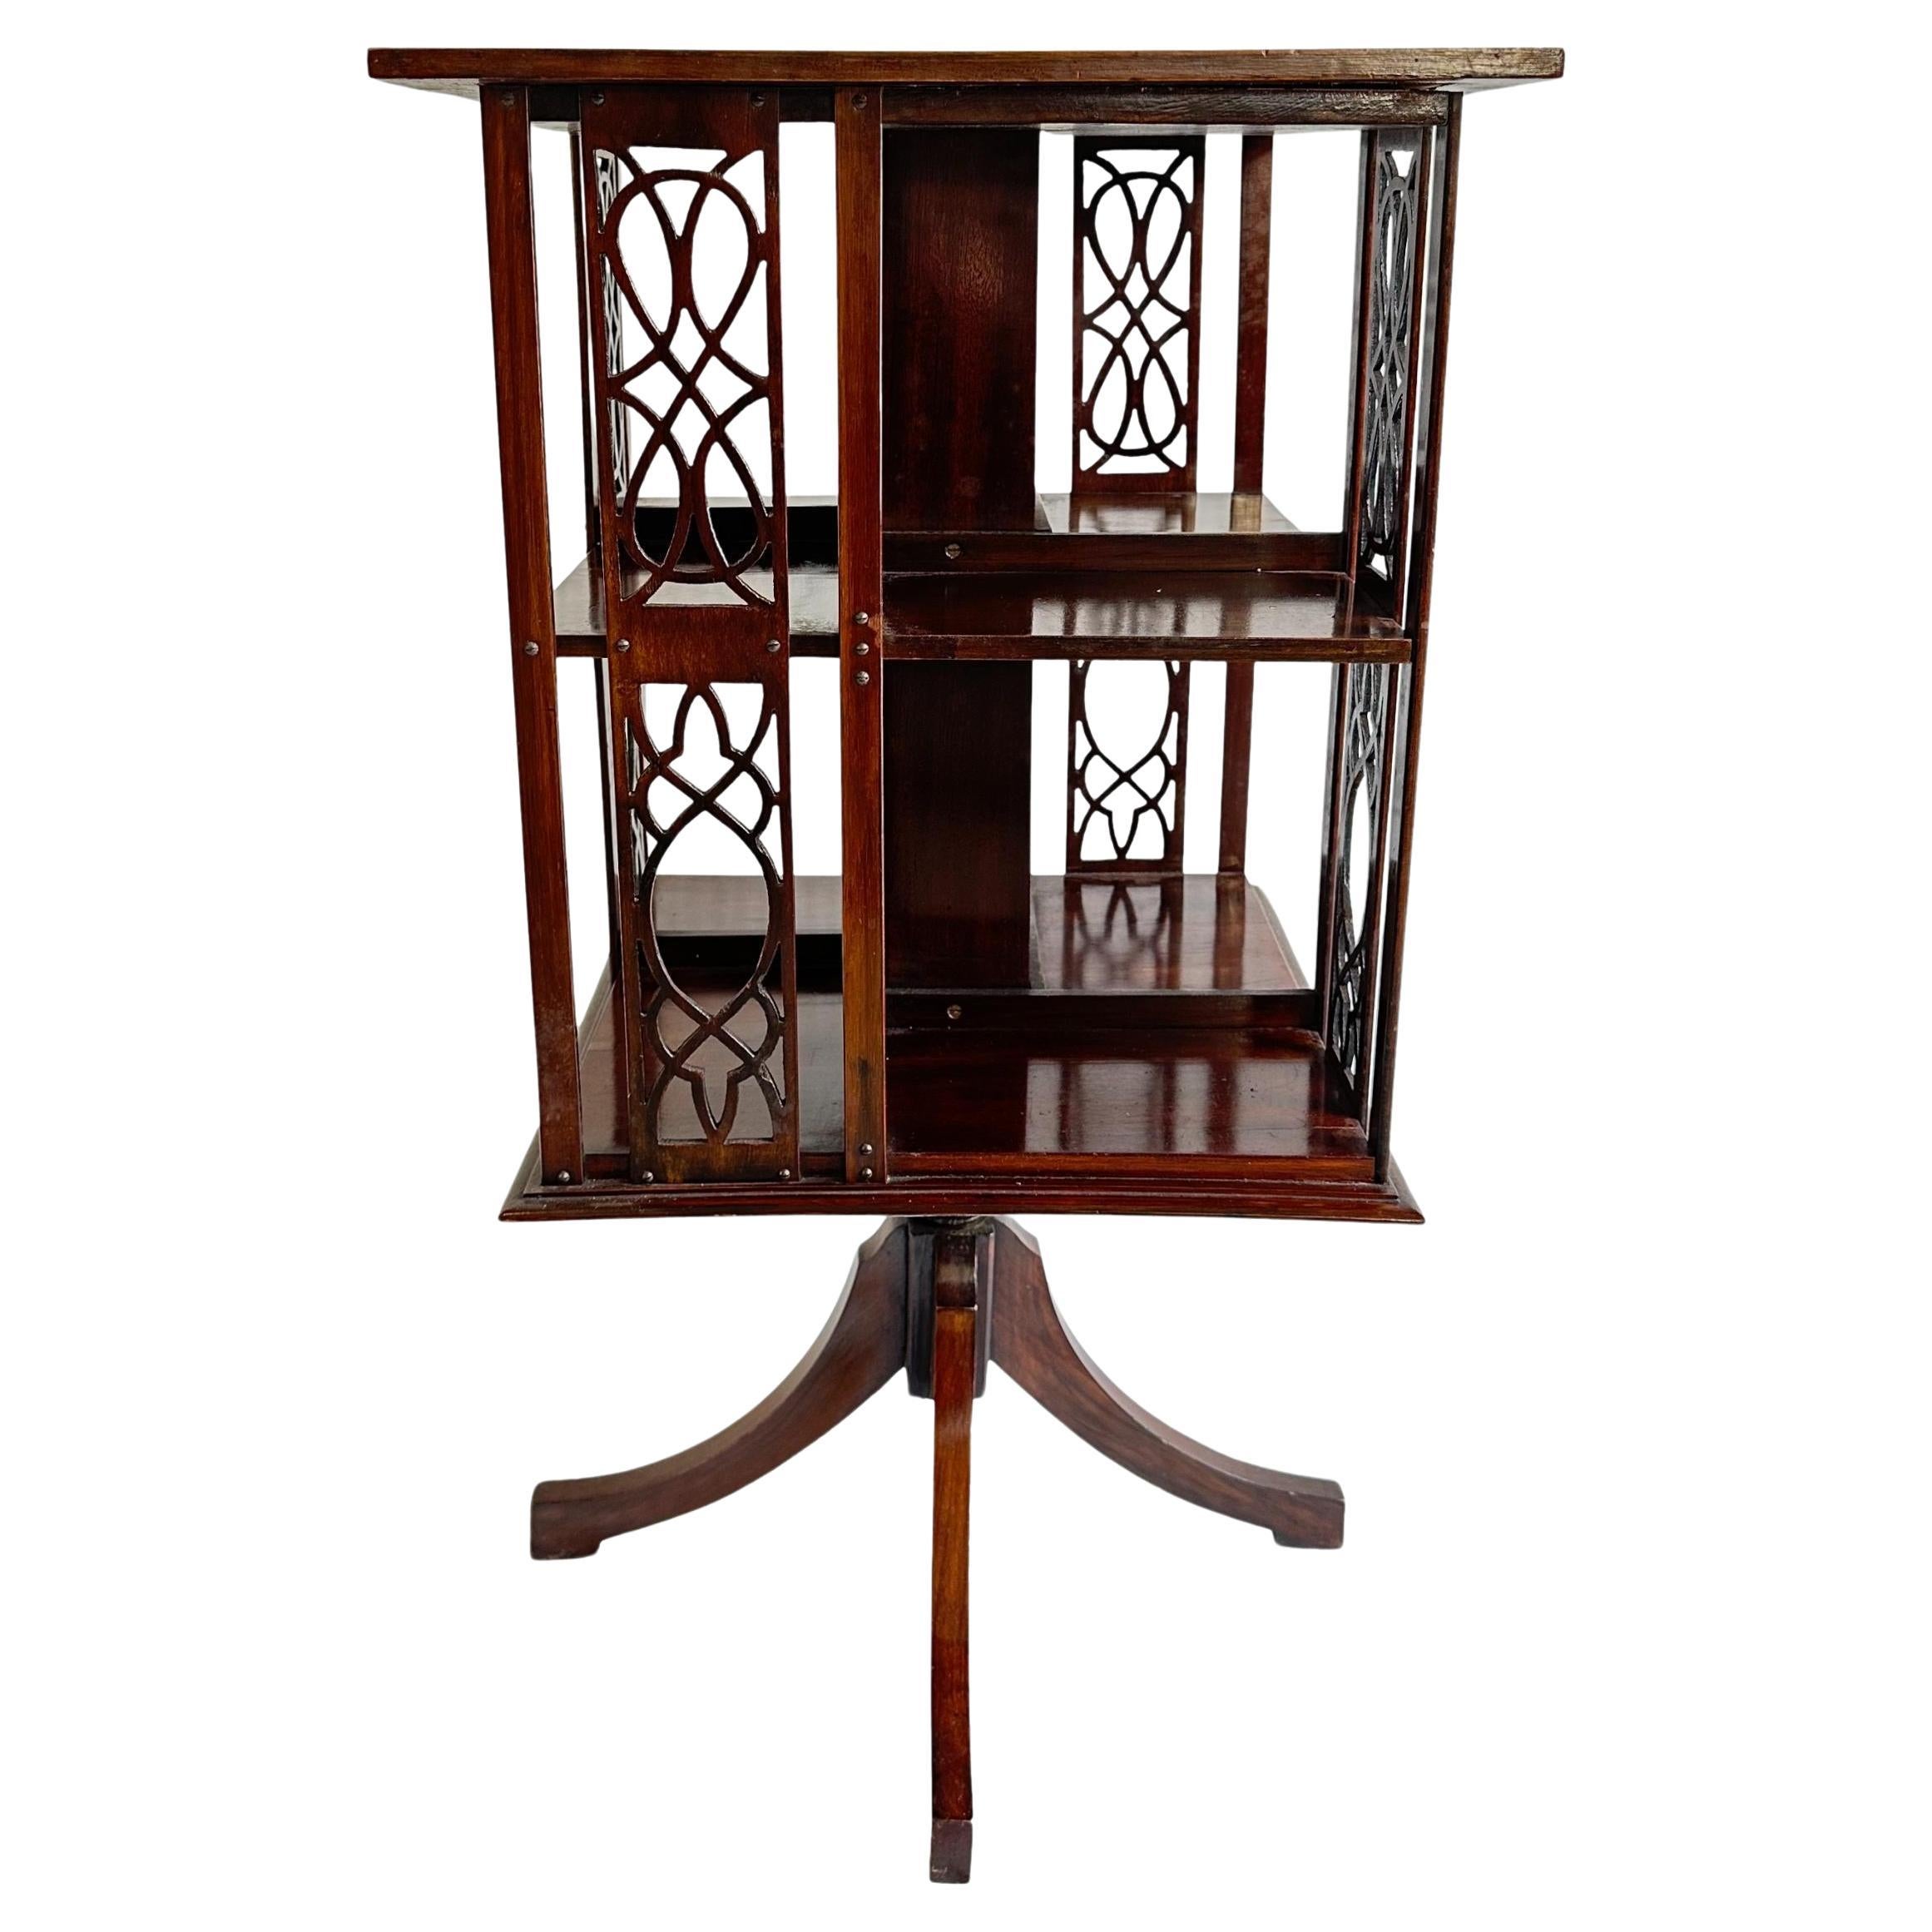 A Mahogany Revolving Bookcase with Satinwood Inlay, English, ca. 1900 For Sale